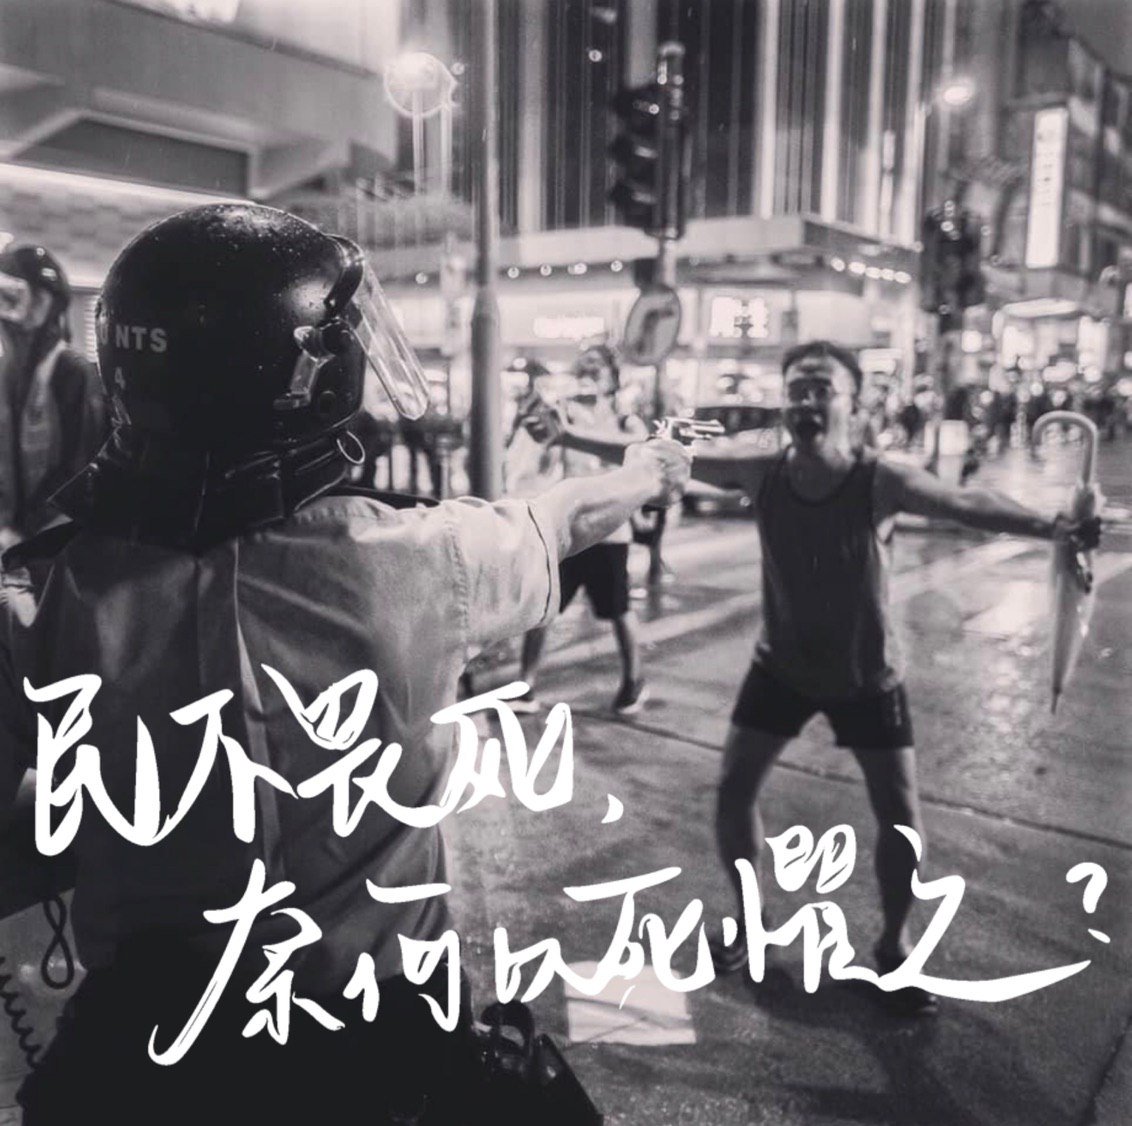 A black and white photo of a man, arms outstretched, unarmed and dressed in a tank top, shorts and flip flops, standing in front of a riot police officer aiming a revolver in his direction. On top is a caption in Chinese: "When the people do not fear death, what do they fear?"